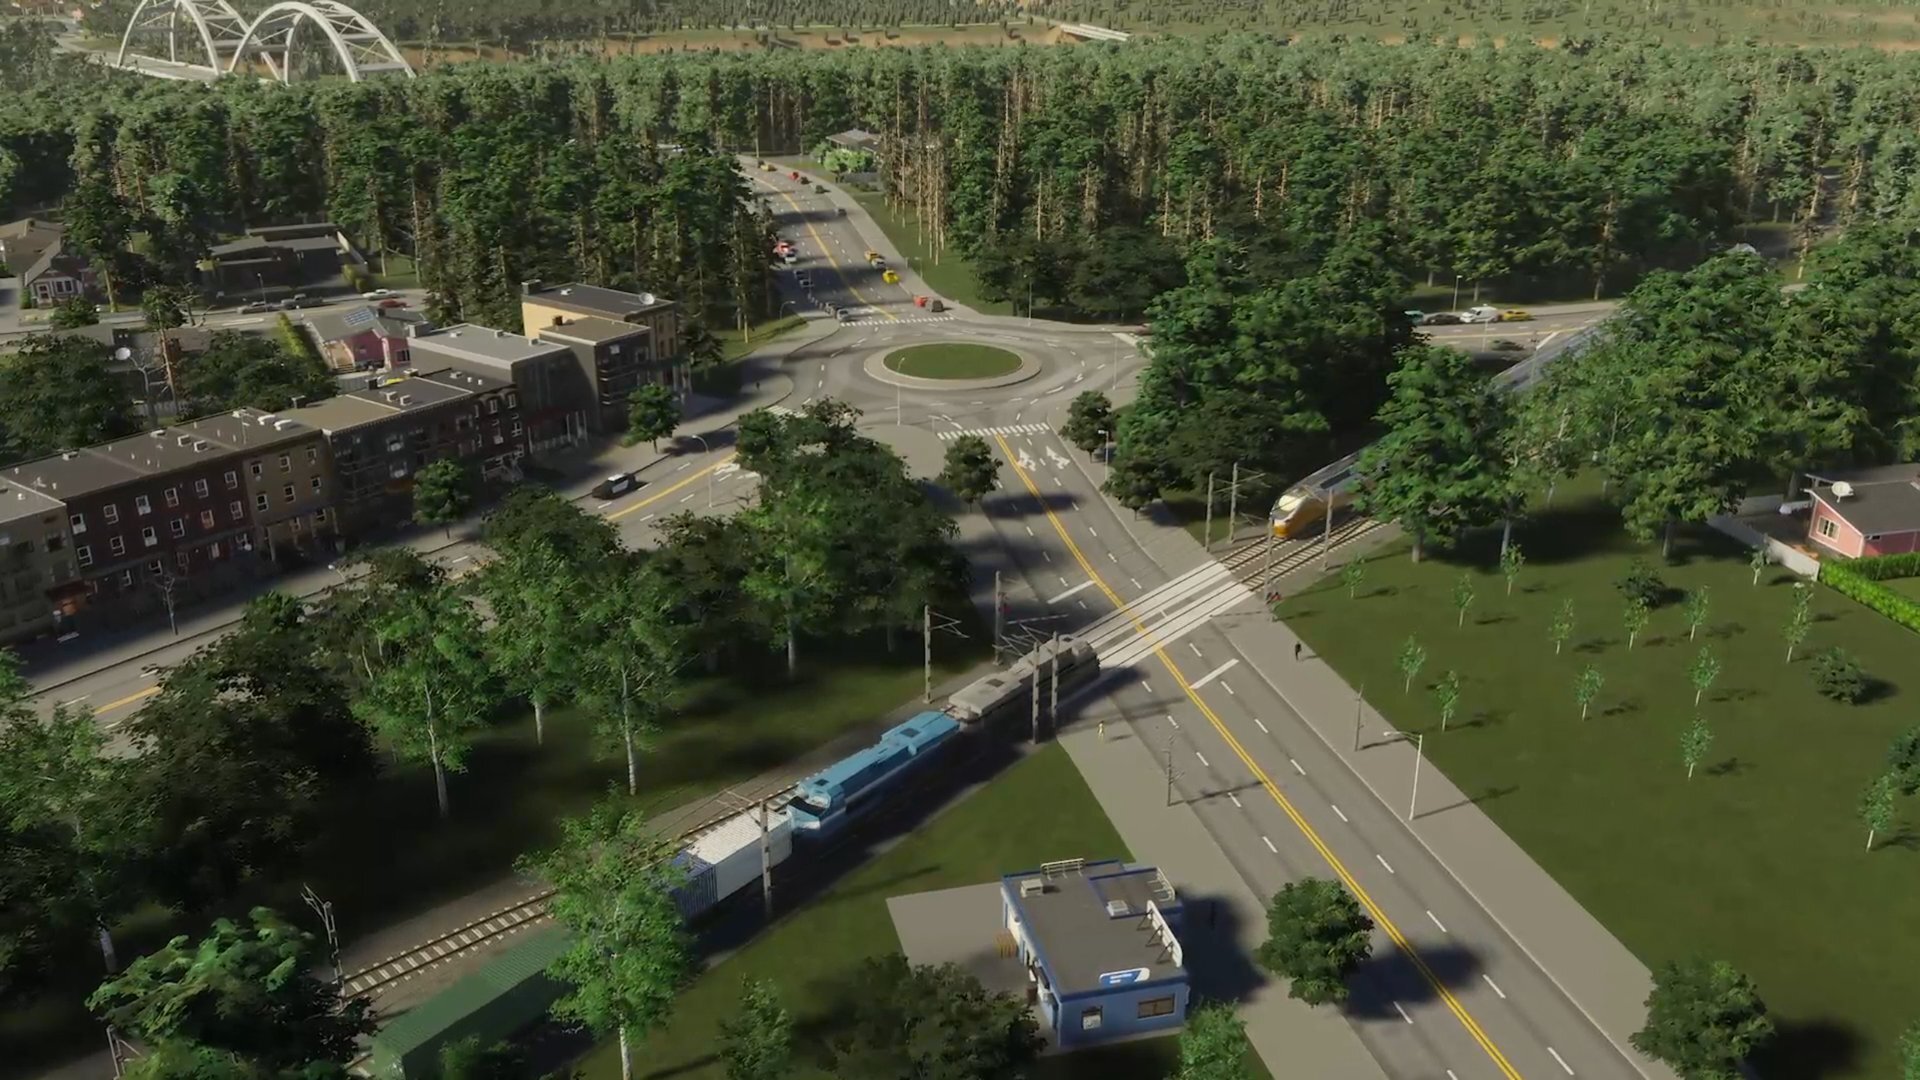 Cities: Skylines 2 joins Xbox Game Pass in October